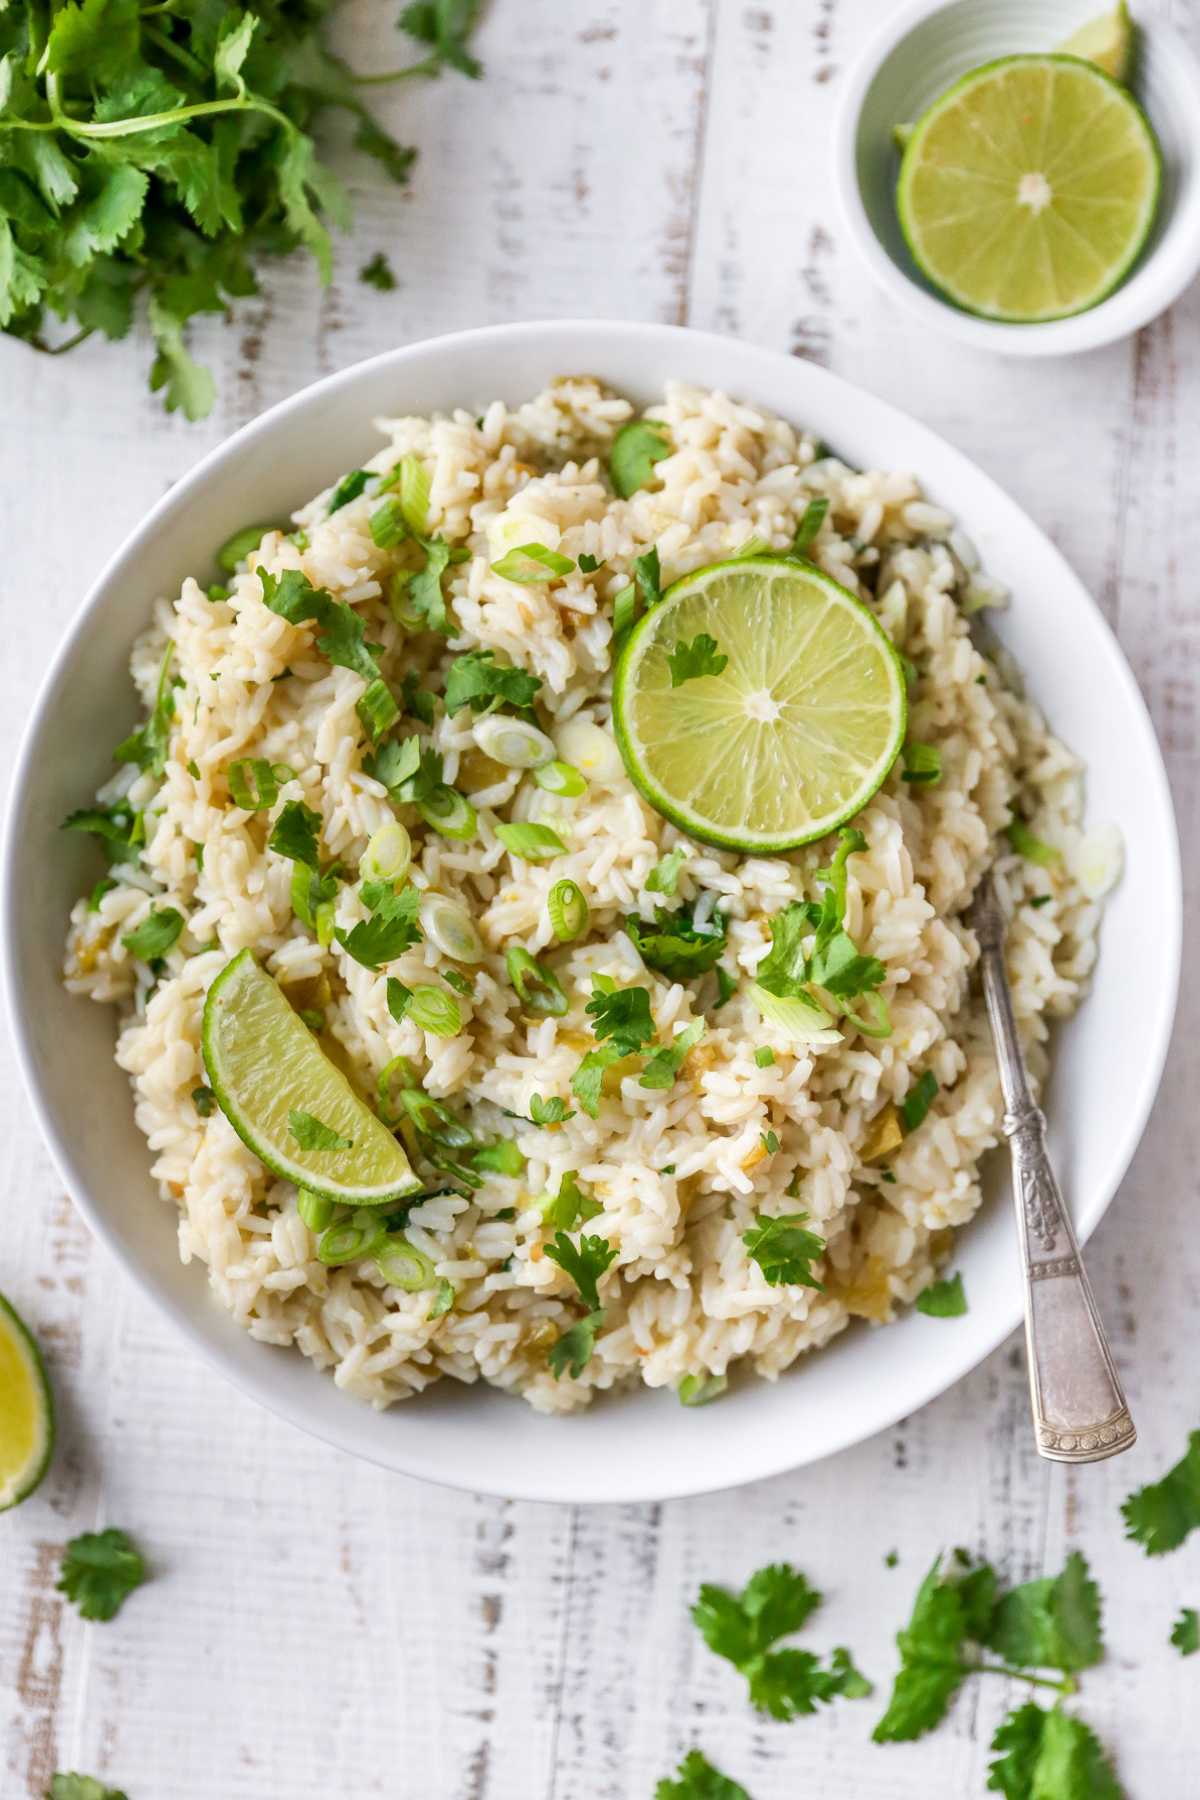 Cilantro lime rice served in a white bowl with limes.